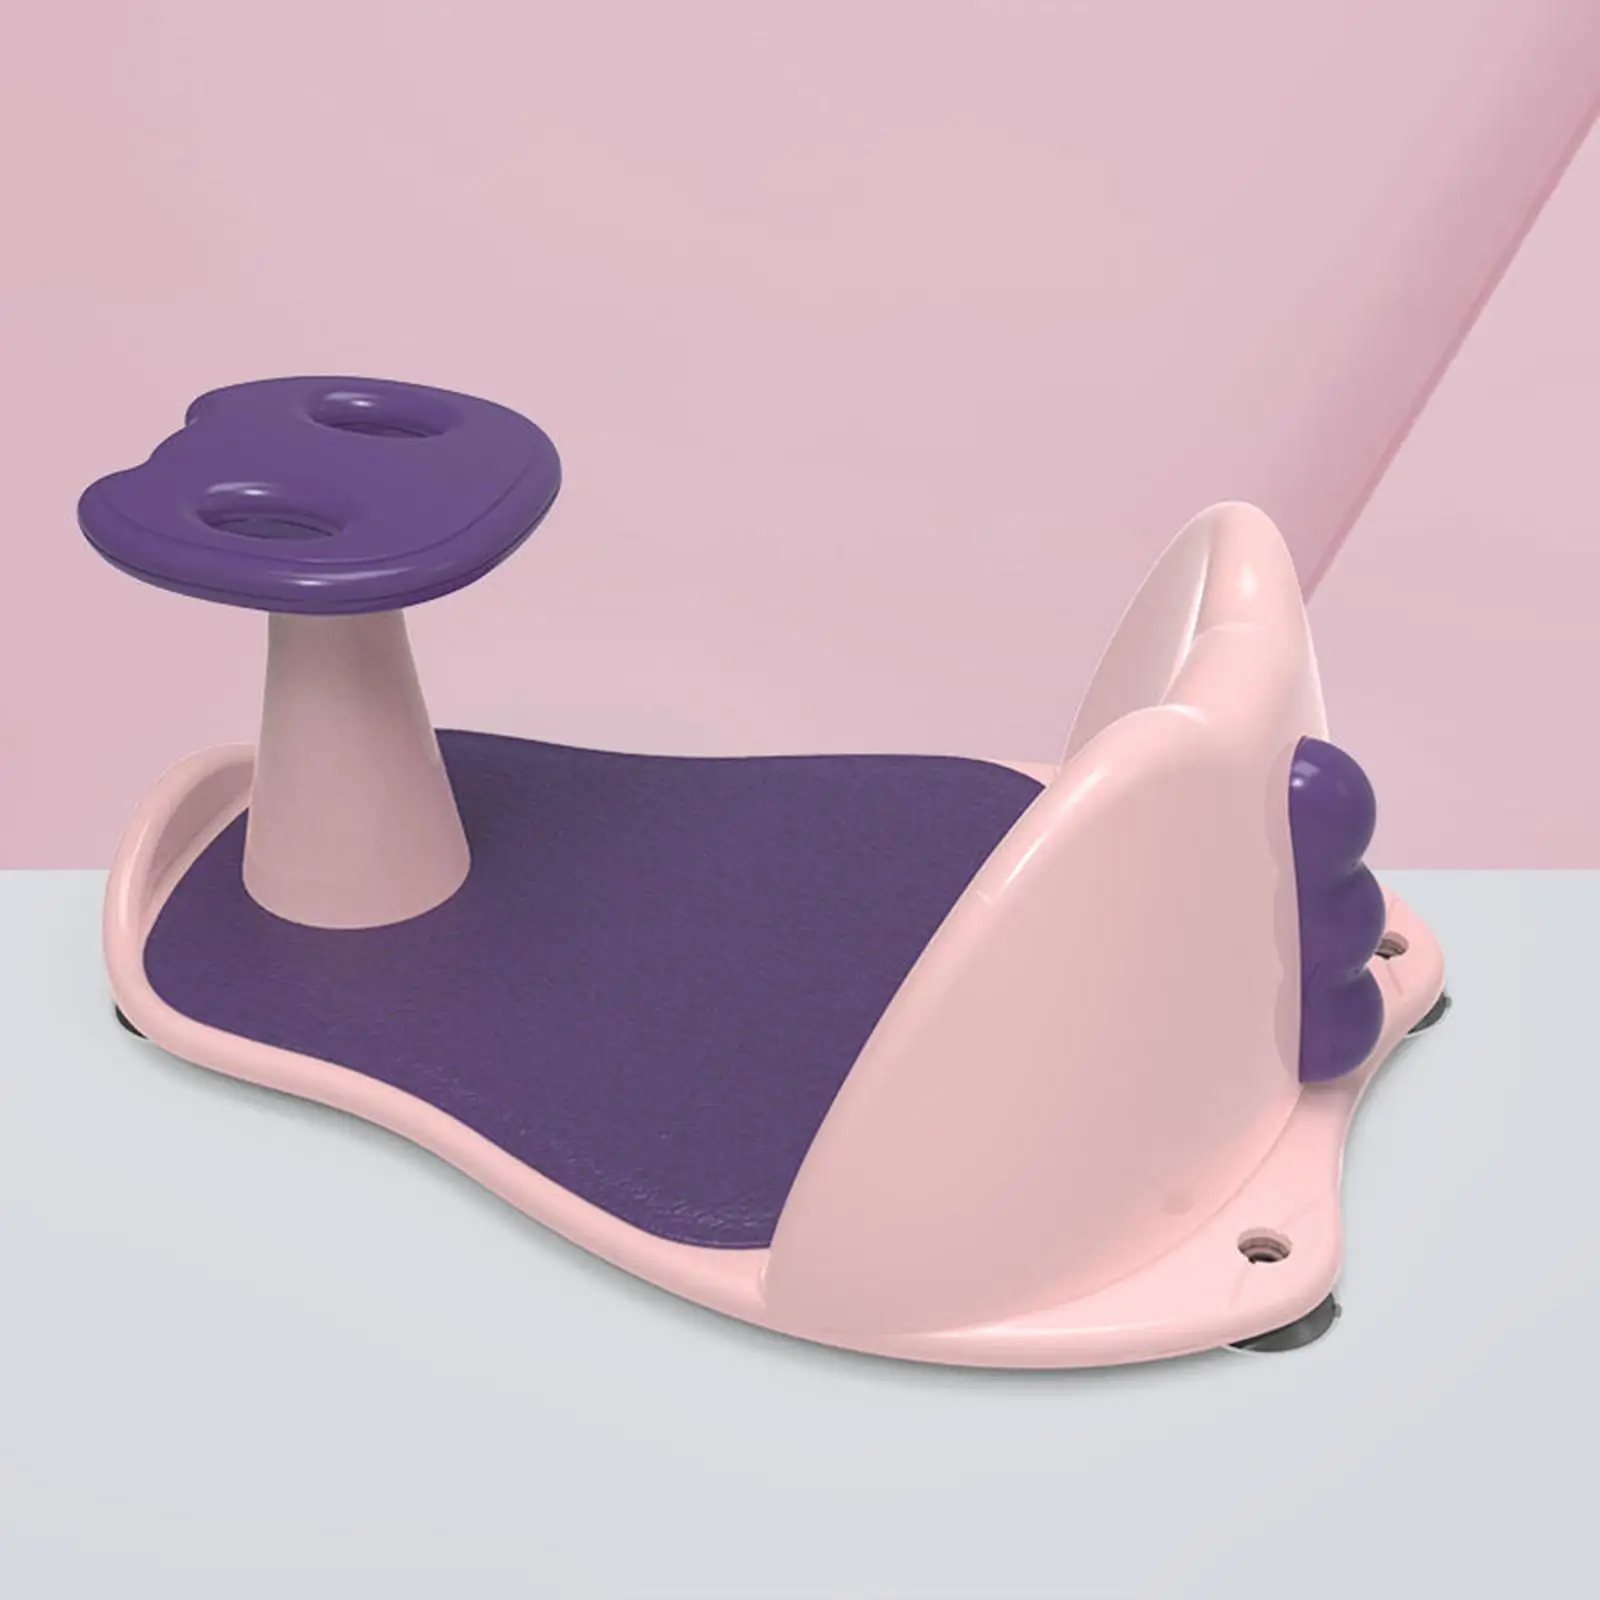 Seat for Open Side with Suction Cups for for The Bath for Newborns